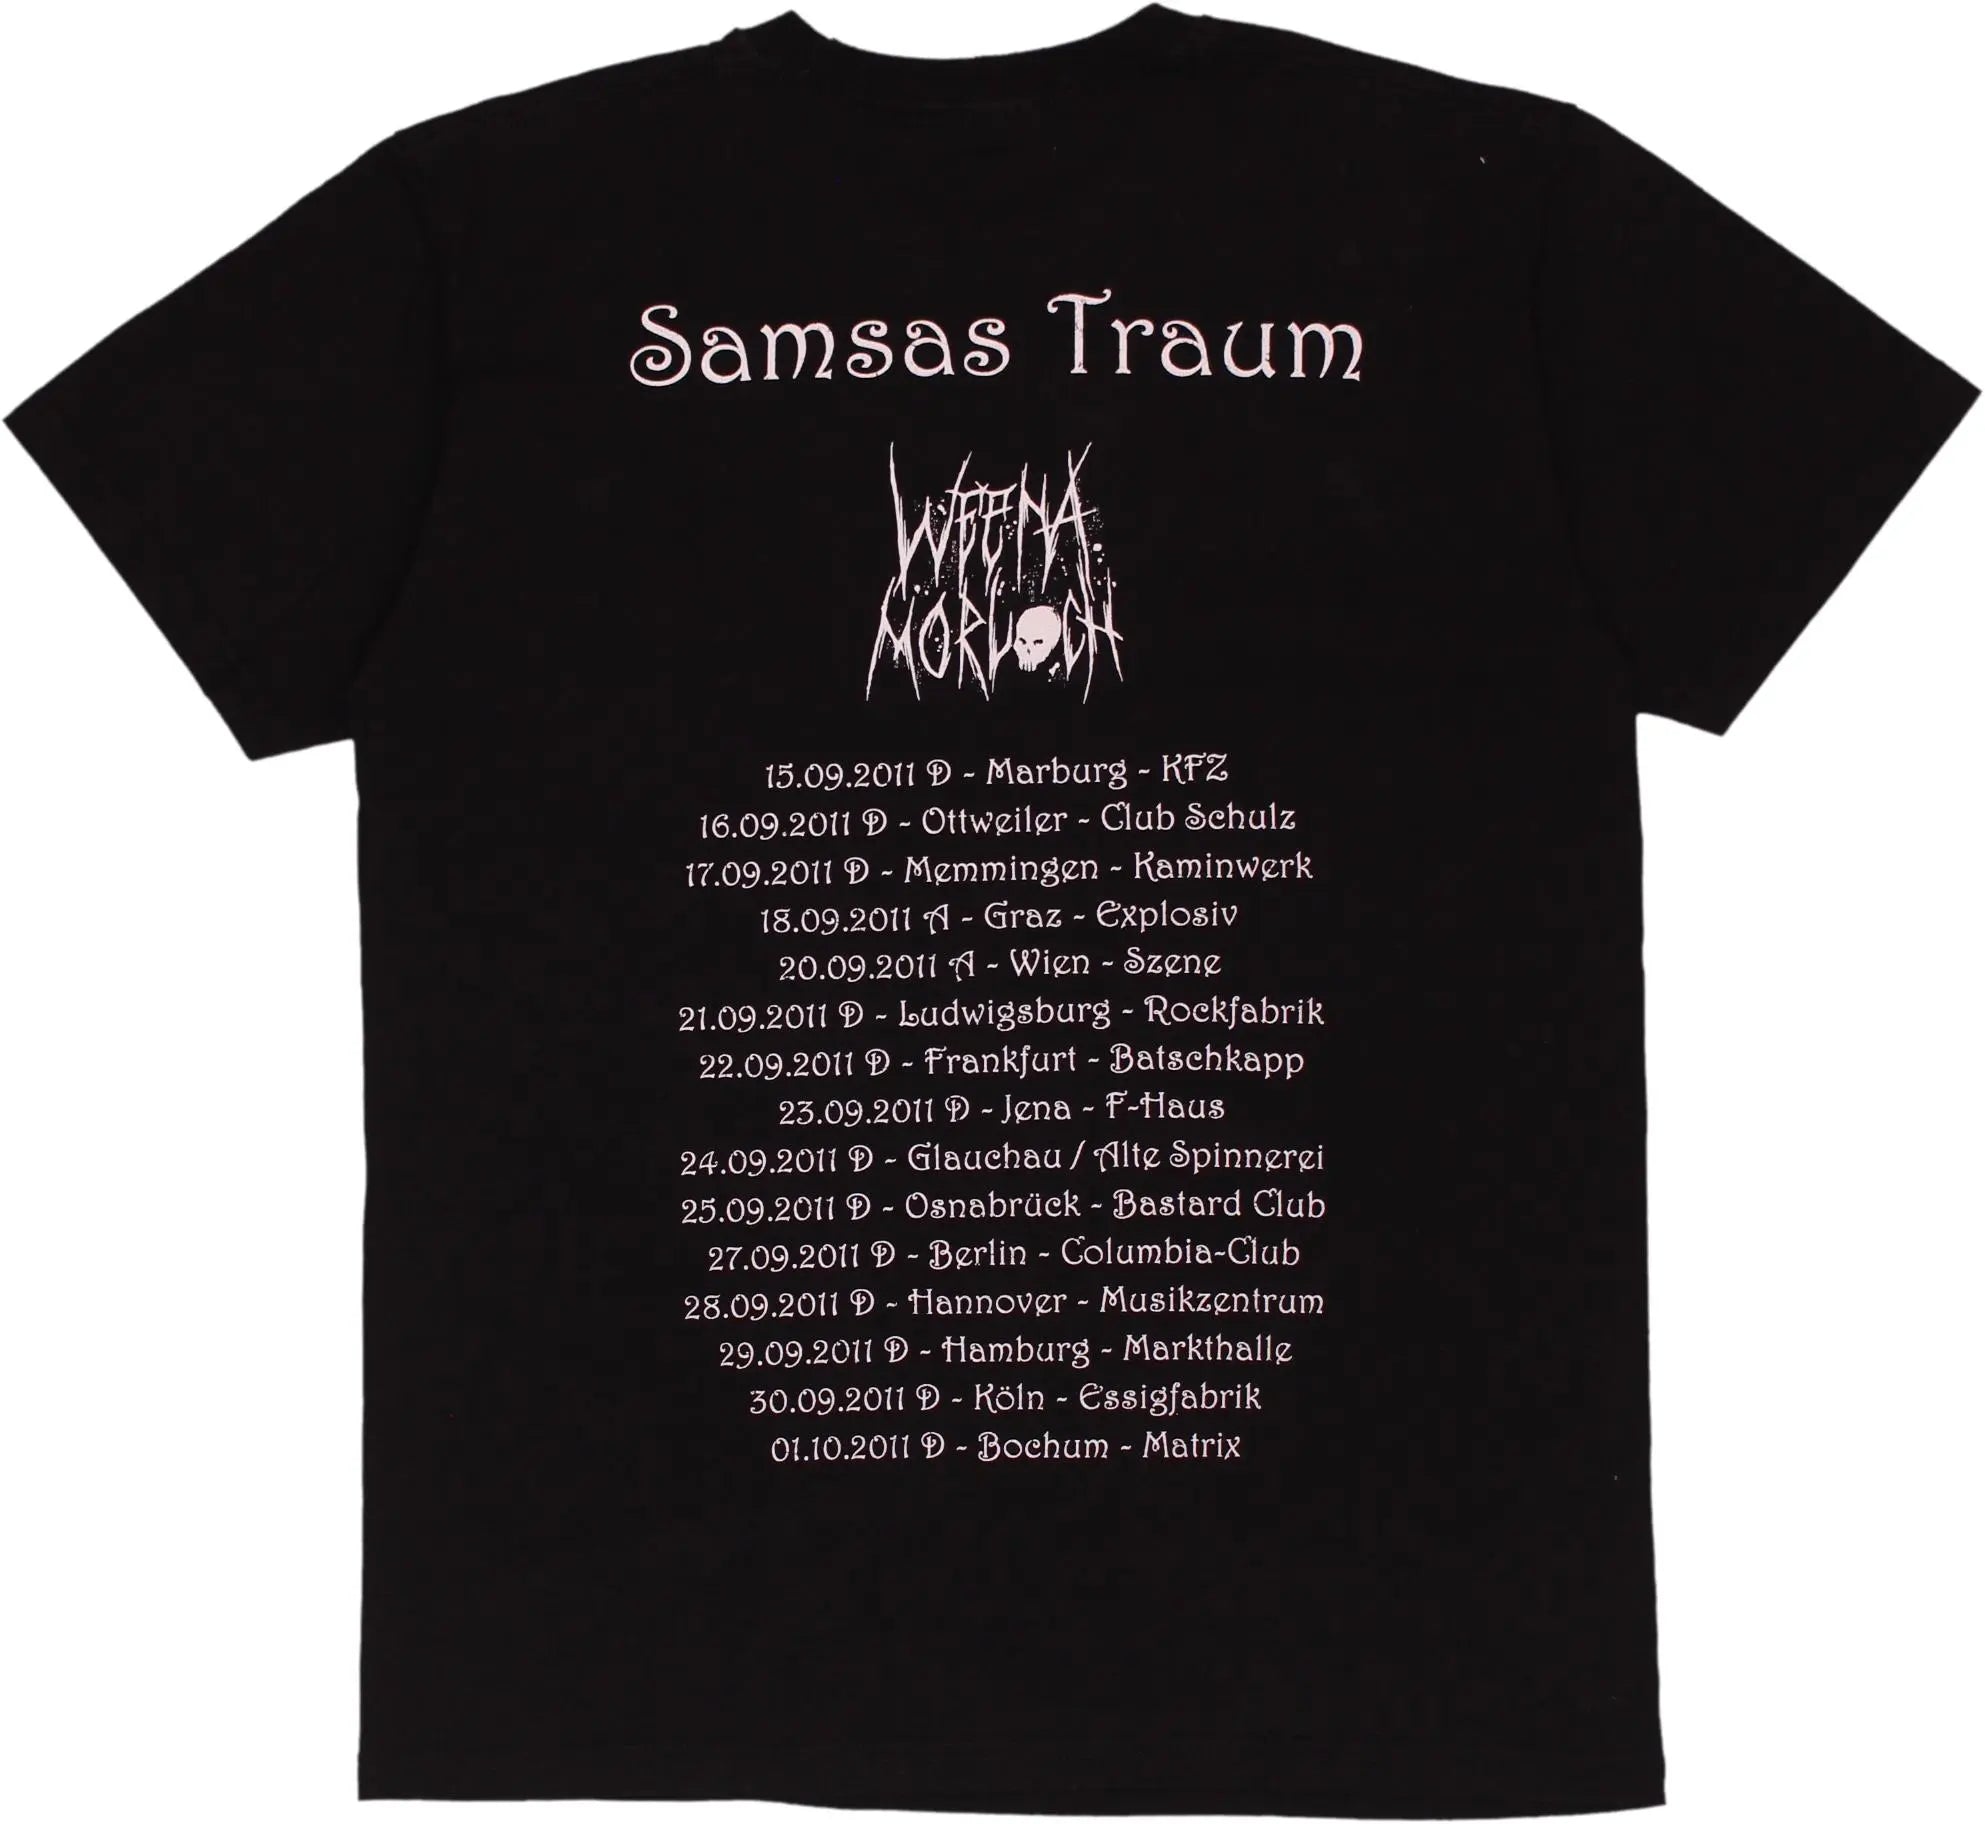 Fruit of the Loom - Samsas Traum Tour 2011 T-shirt- ThriftTale.com - Vintage and second handclothing